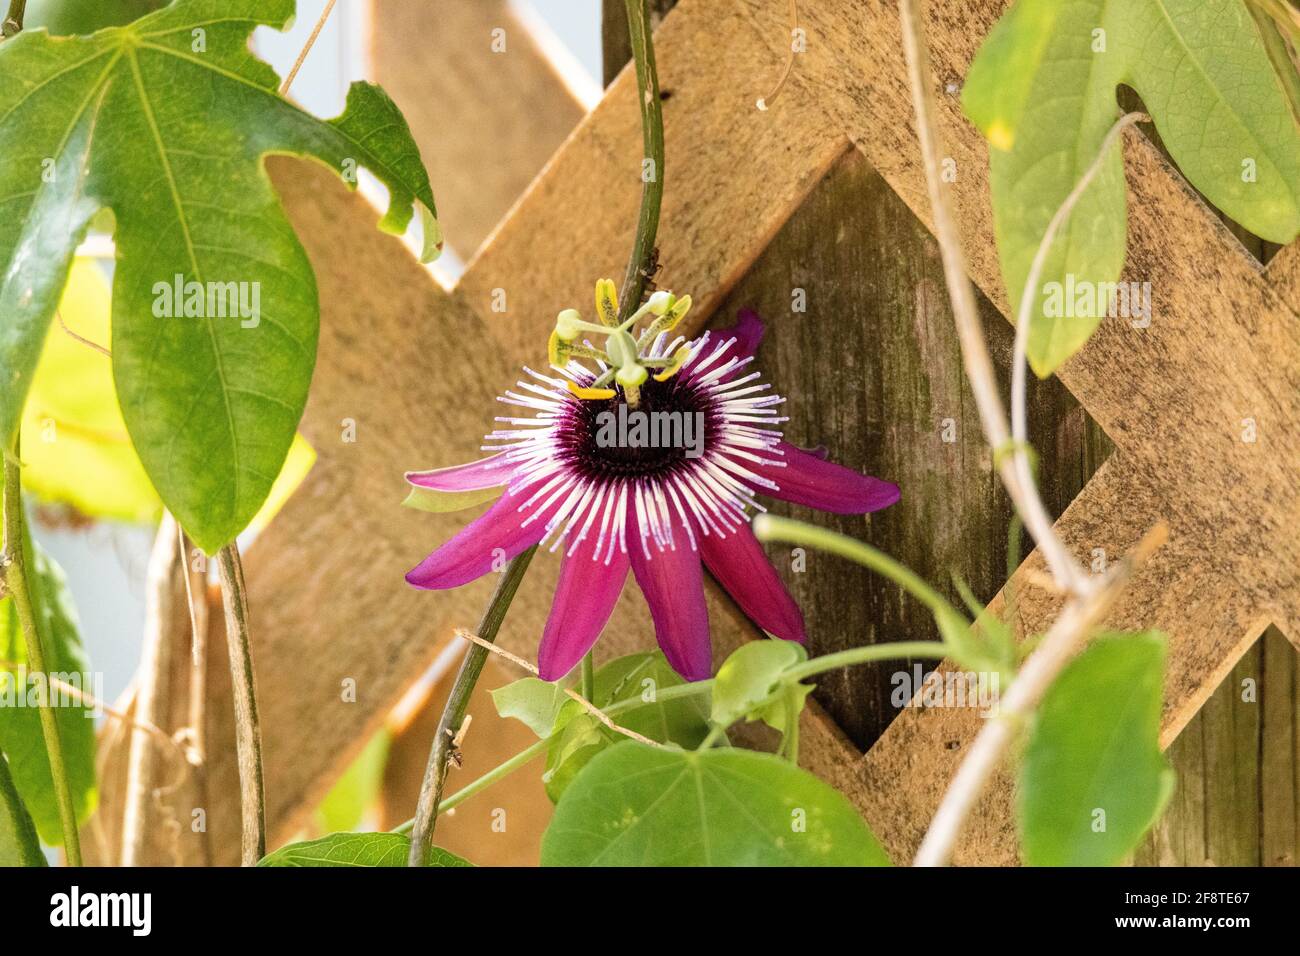 Beautiful purple passion flower Passiflora Victoria with white spikes in the center in a botanical garden Stock Photo